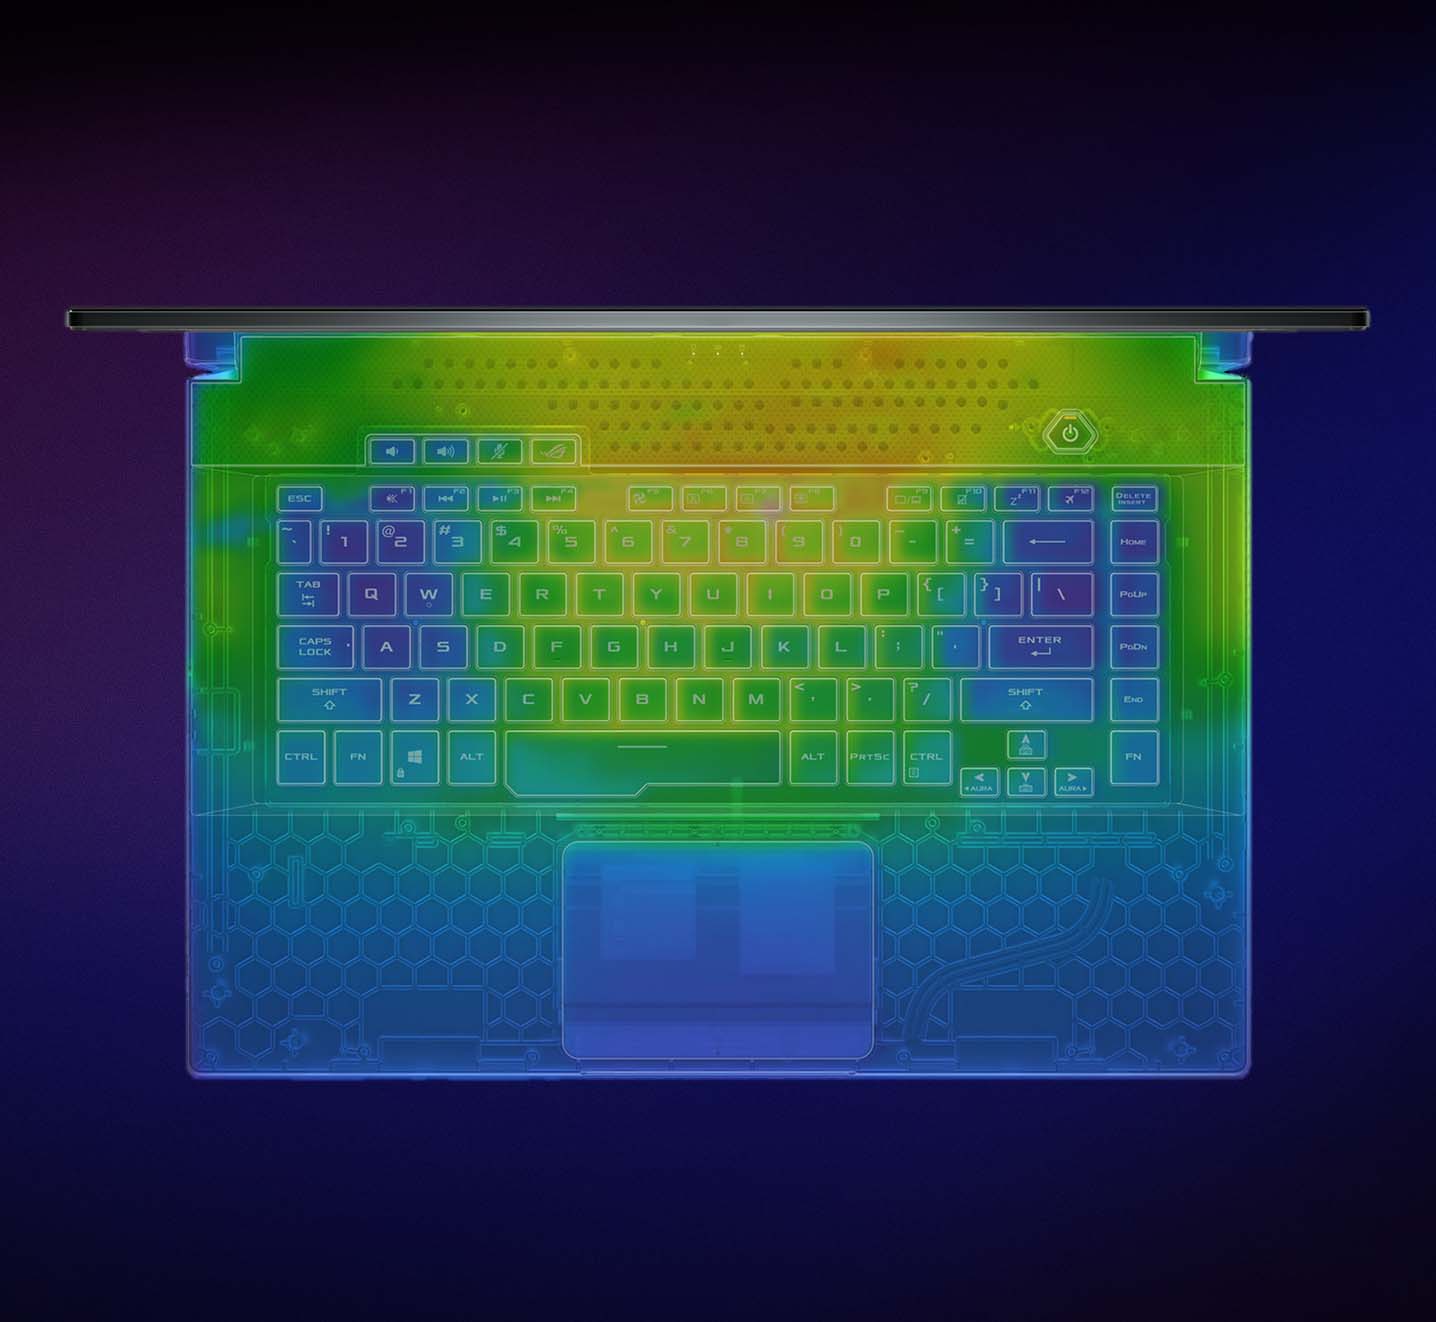 The image of coolzone keyboard keeping your hands frosty